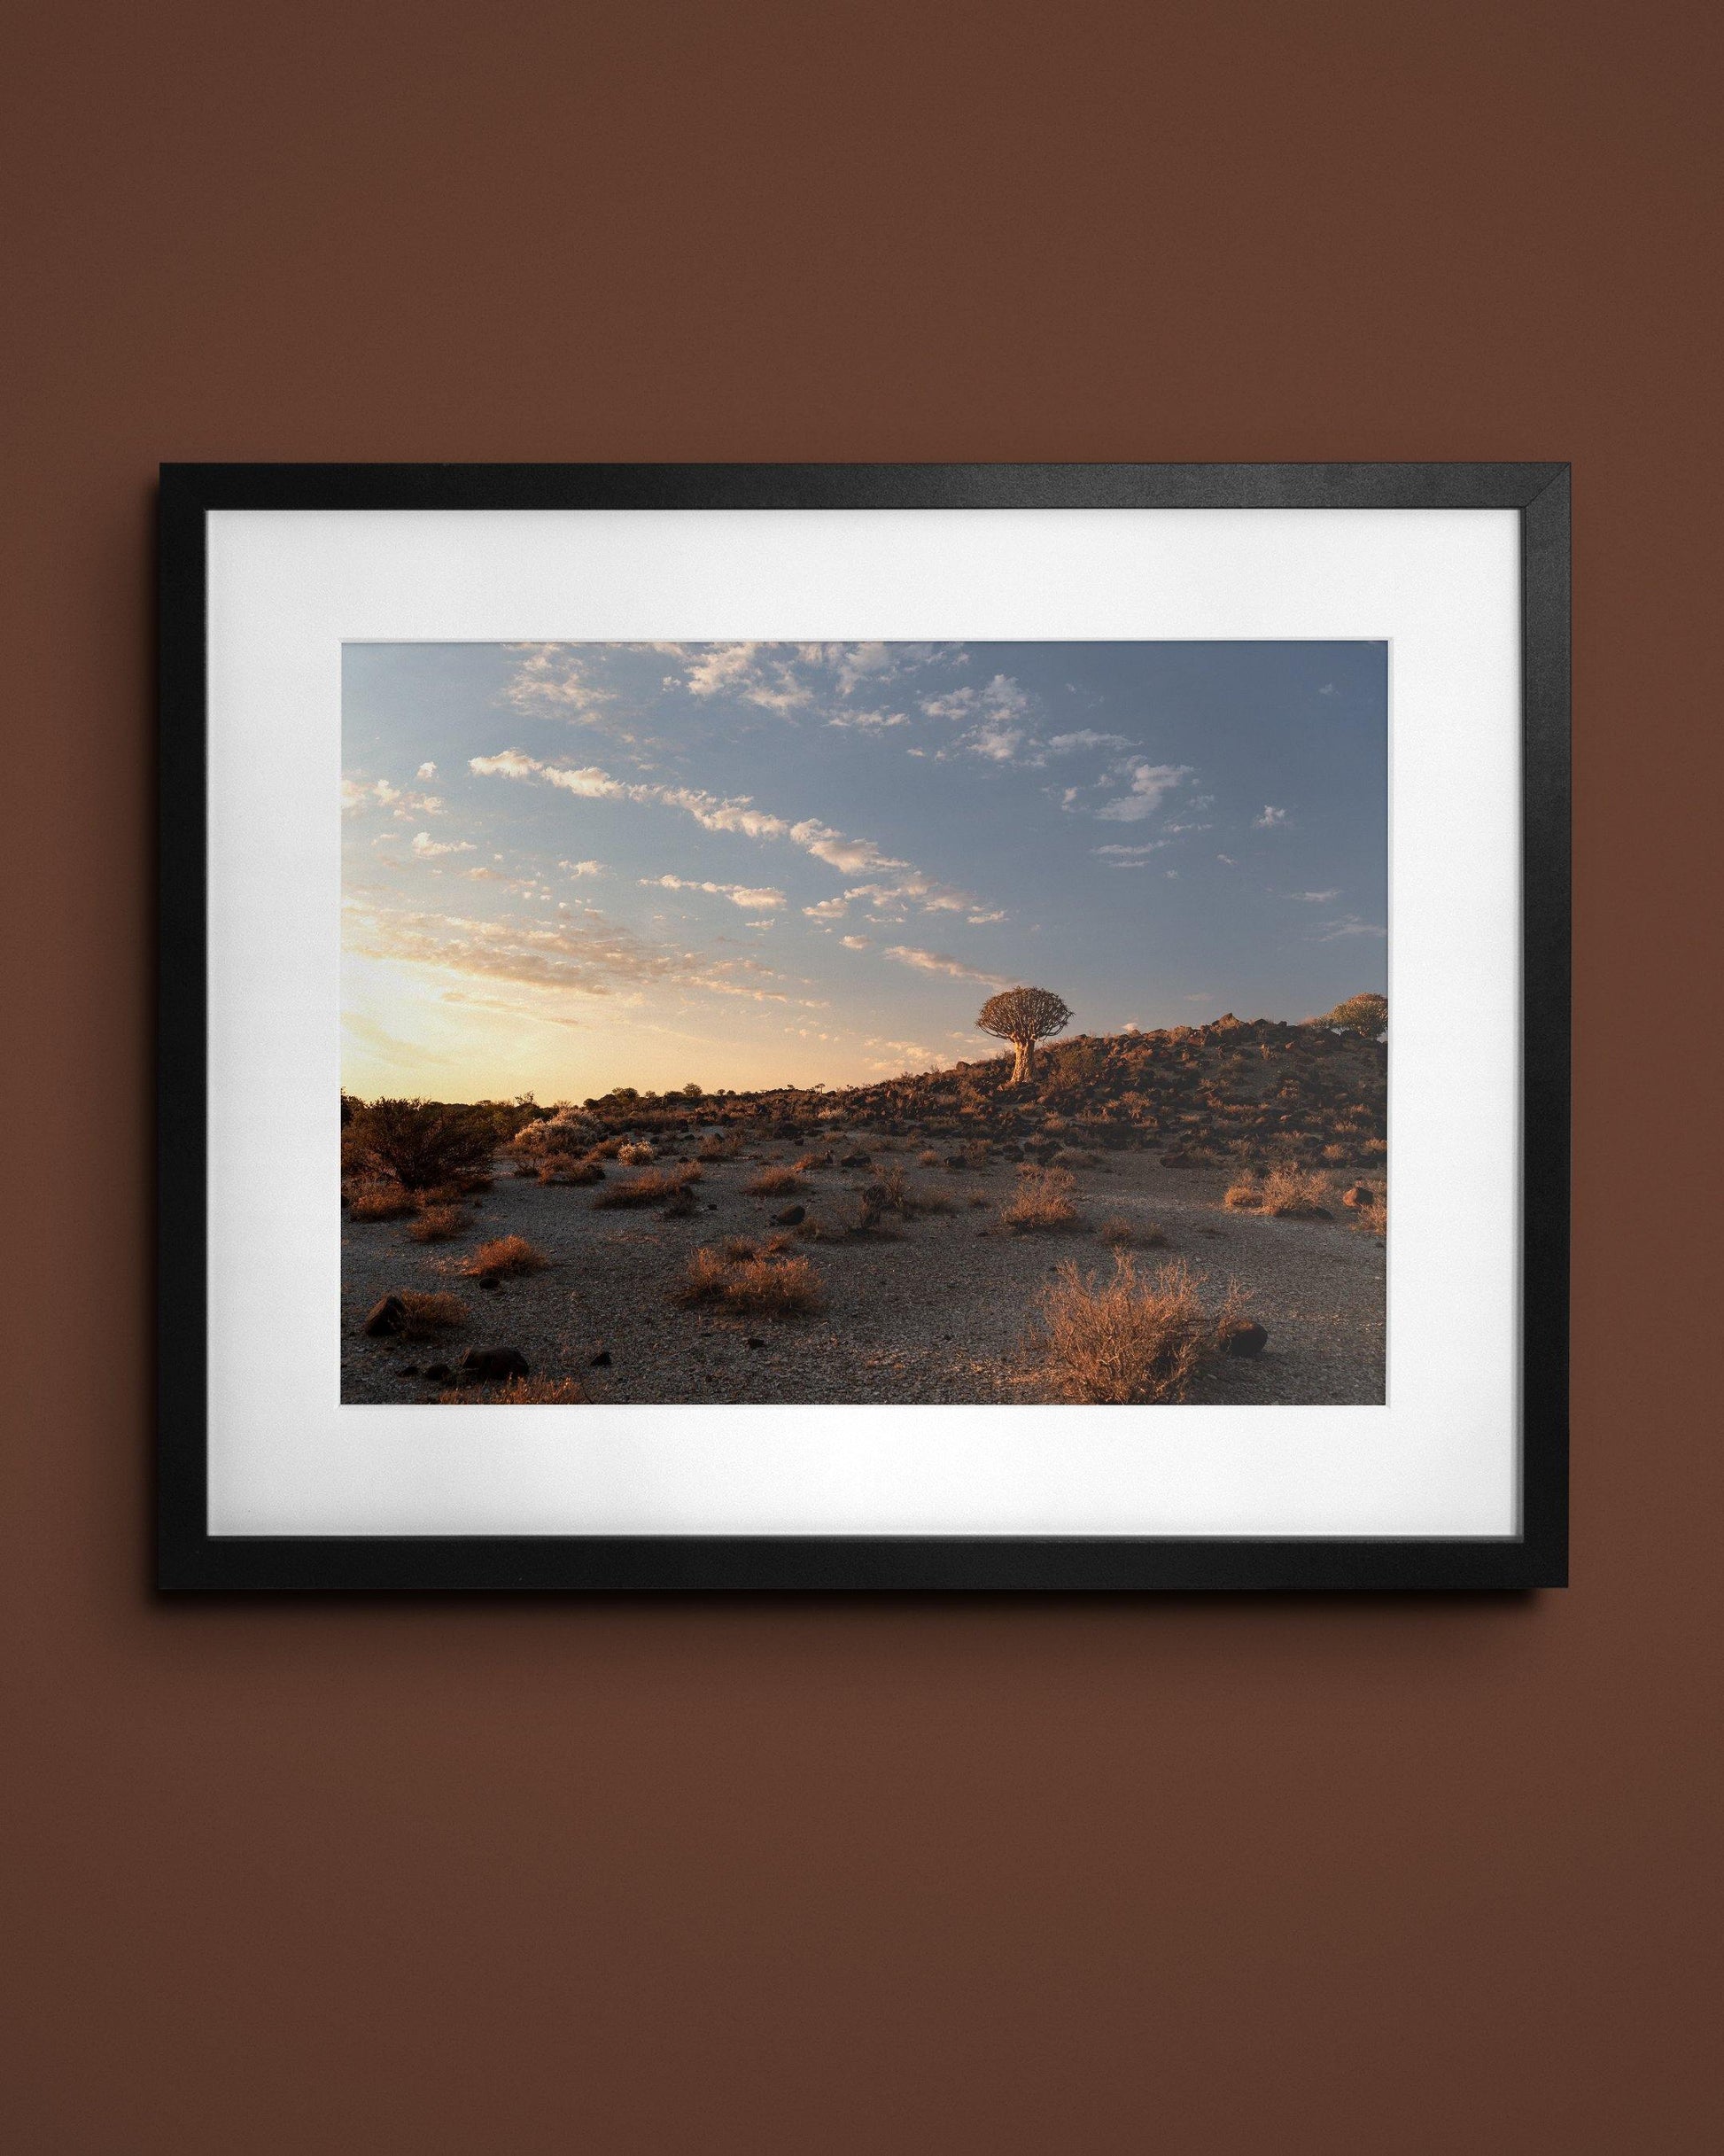 Fine-art print called A quivery sunset from Kaj on the wall